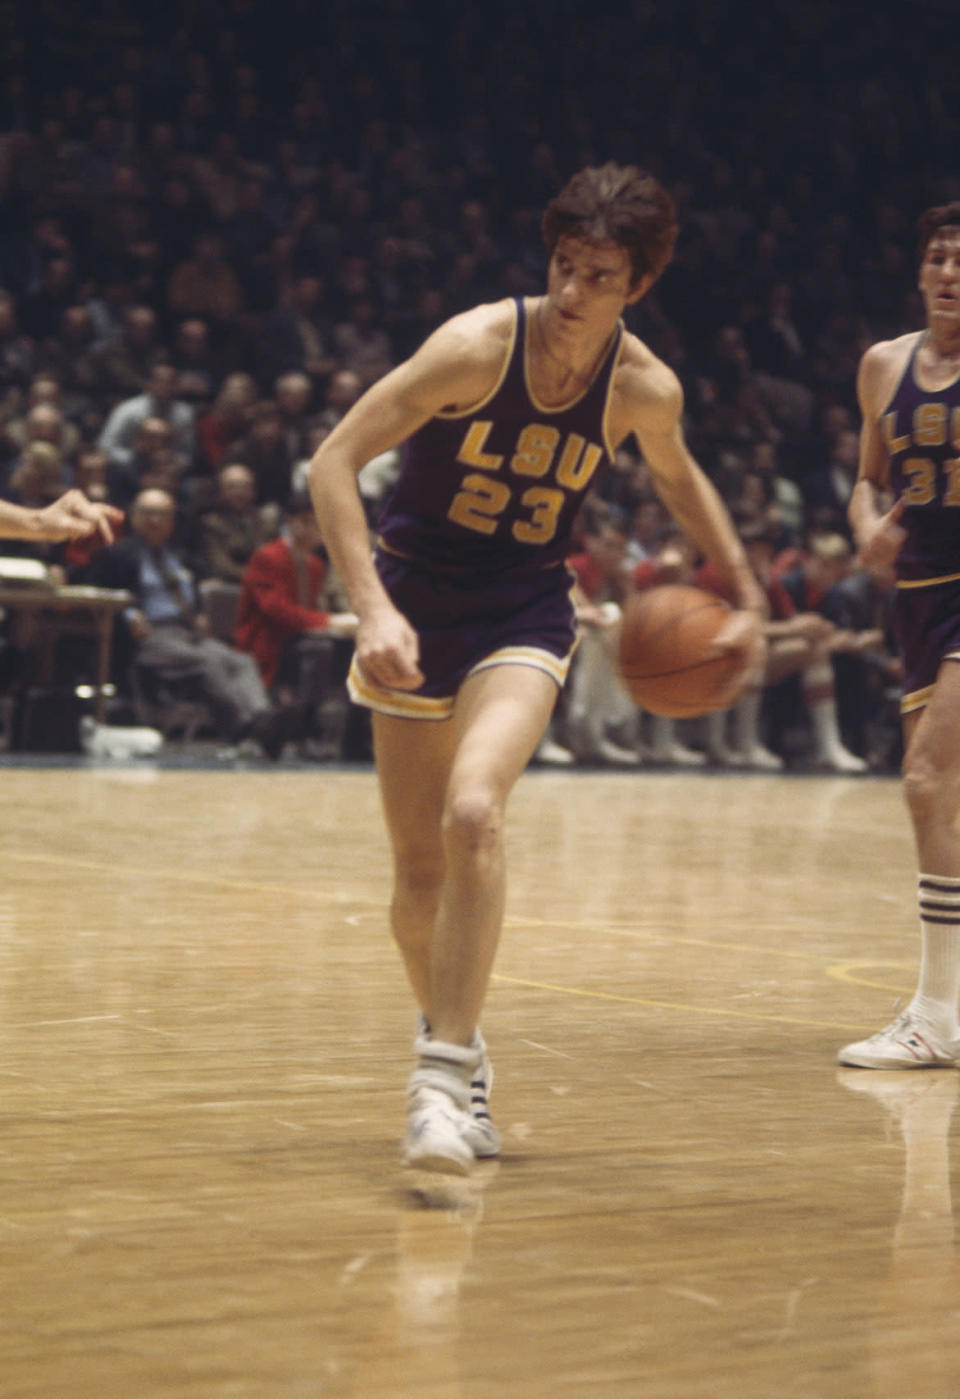 Nobody lscored buckets like LSU's Pistol Pete. The three-time All-American averaged 44.2 points a game over a four-year college career.